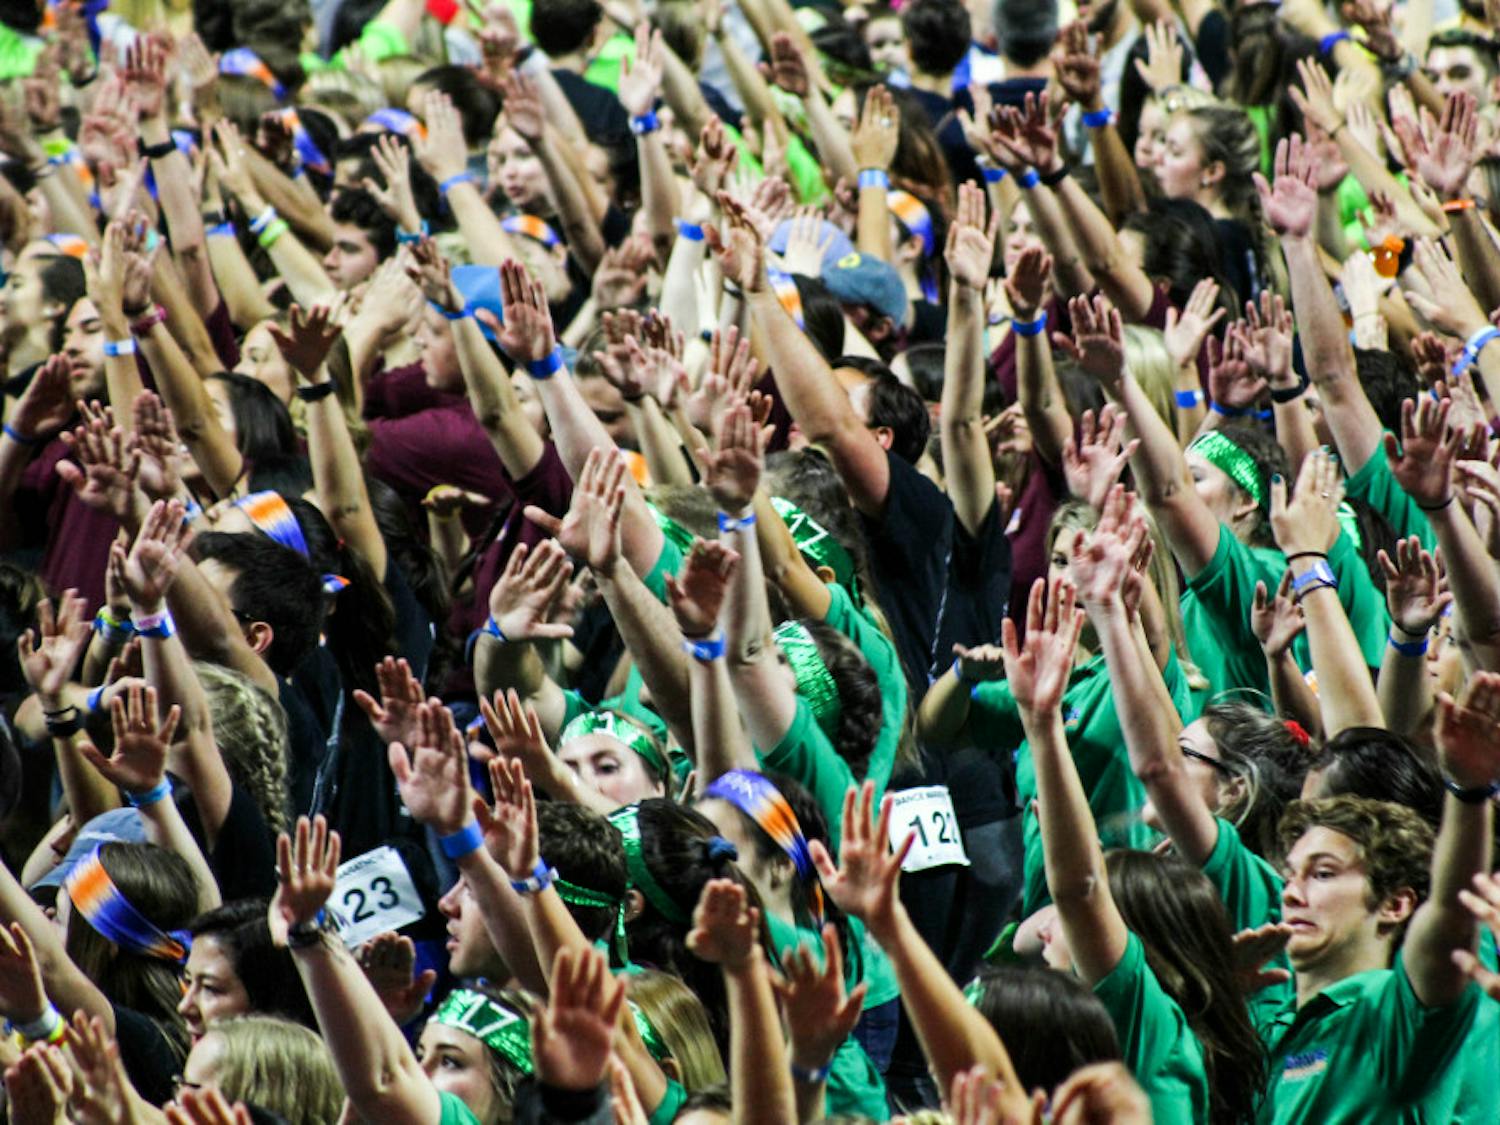 Dancers raise their hands during a dance number at 2017's Dance Marathon at the O'Connell Center. Dance Marathon raises money and awareness for Children's Miracle Network. 